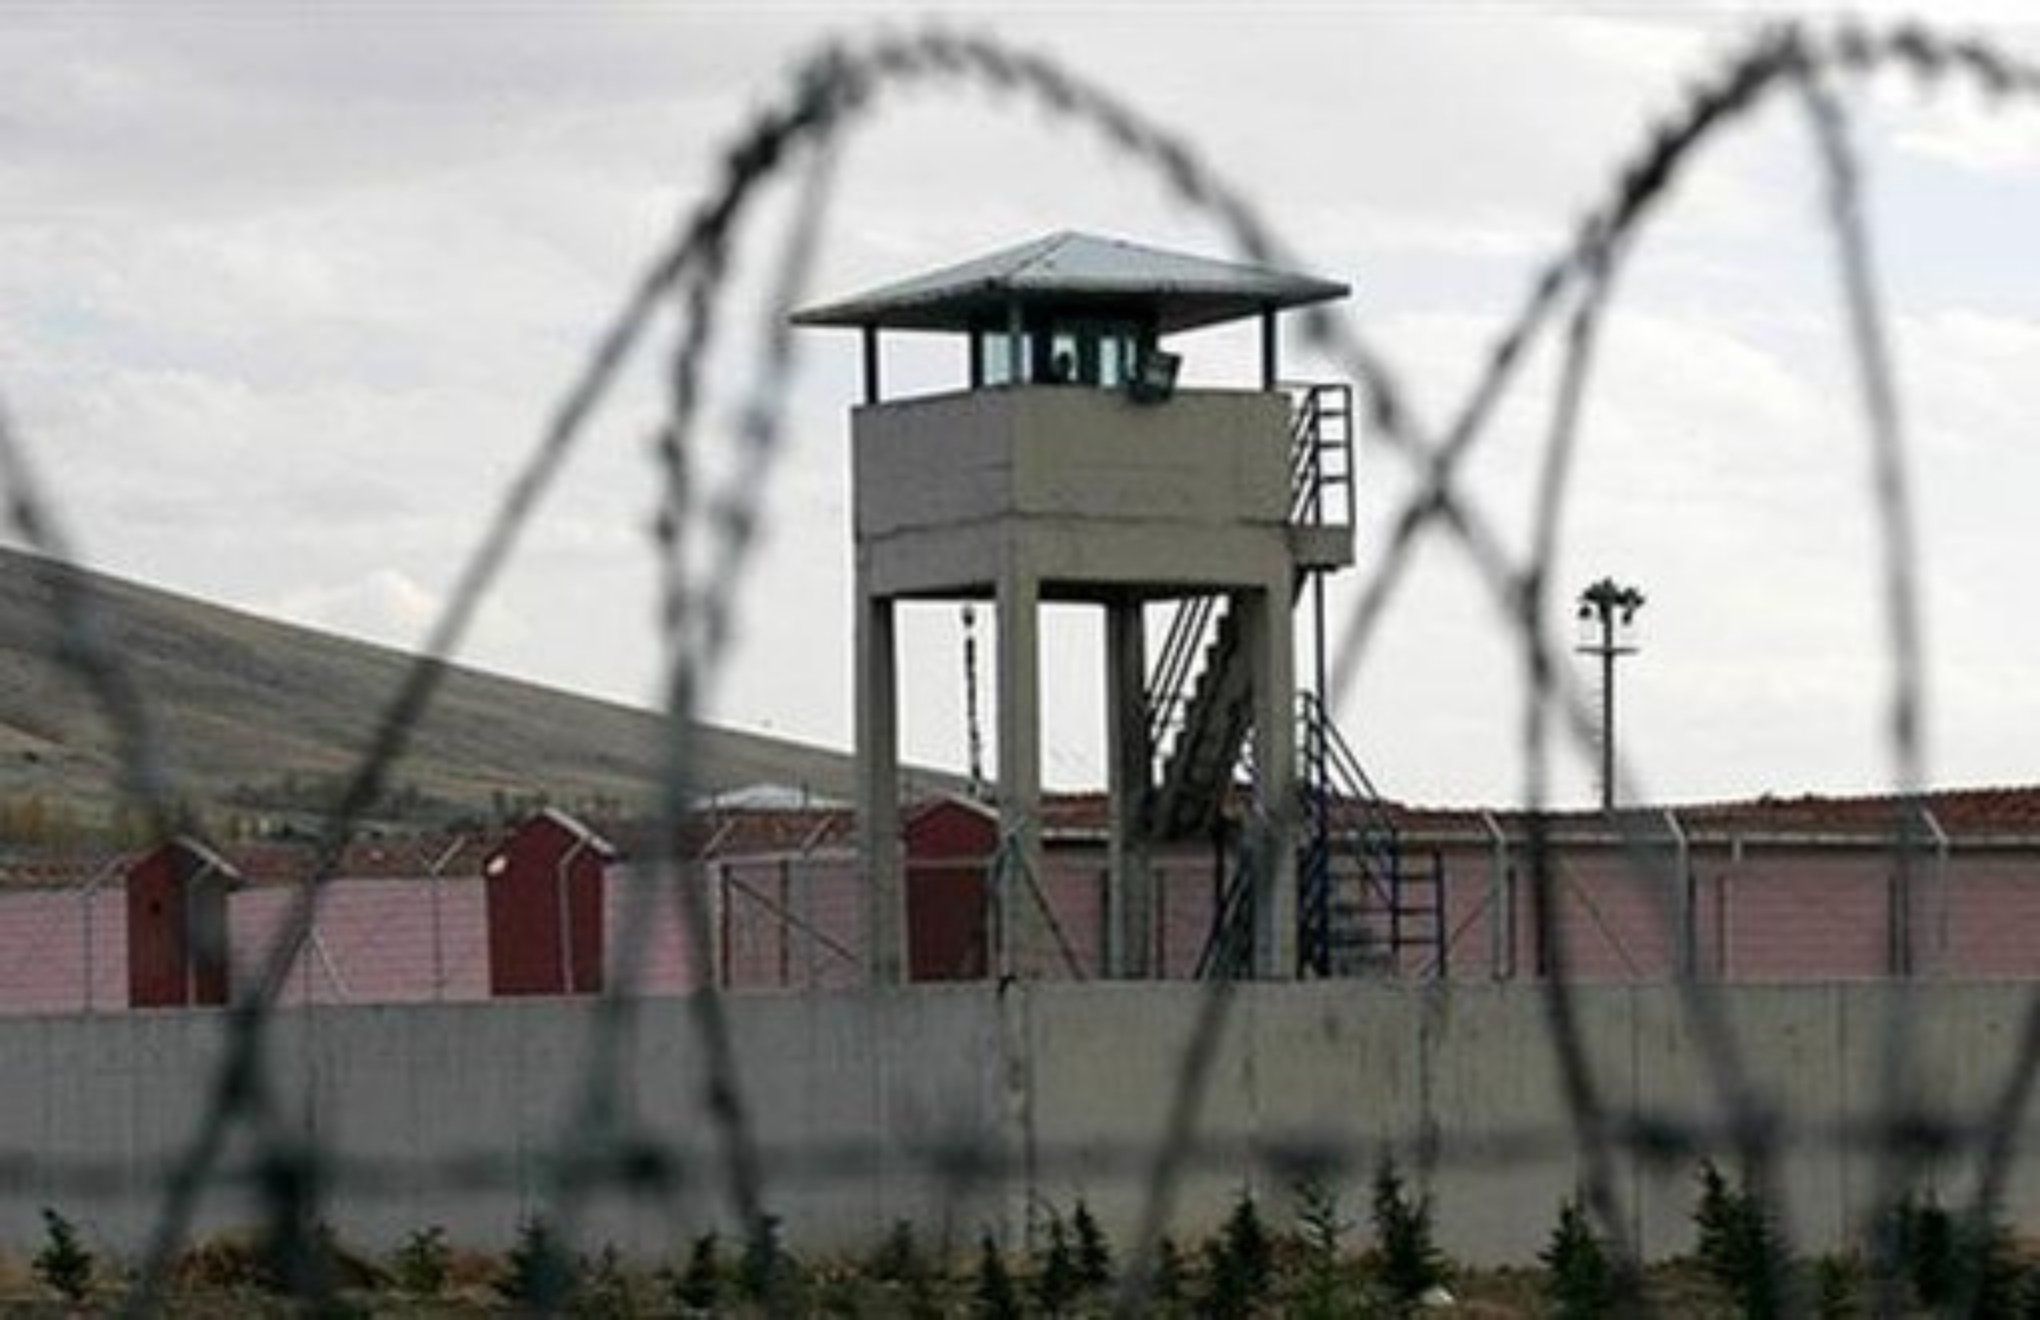 HDP calls for ‘immediate action to protect ill prisoners’ rights and health’